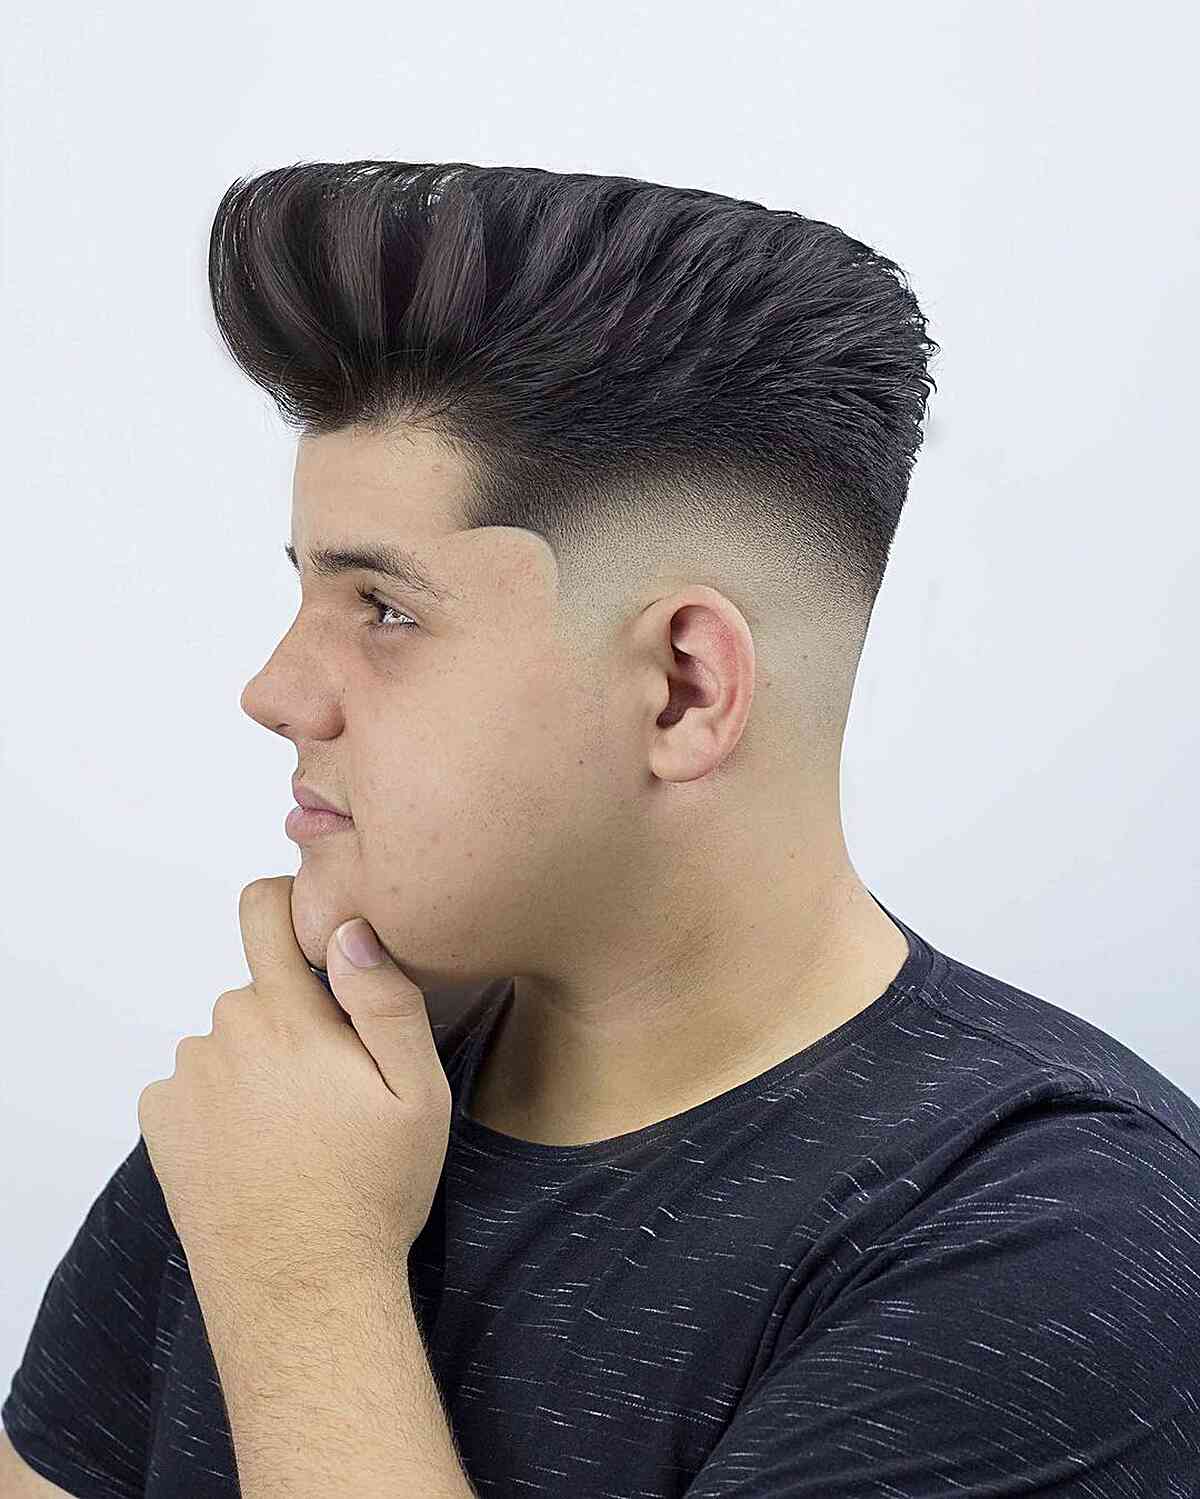 Suave Bald Fade with a High Top for Teen Boys